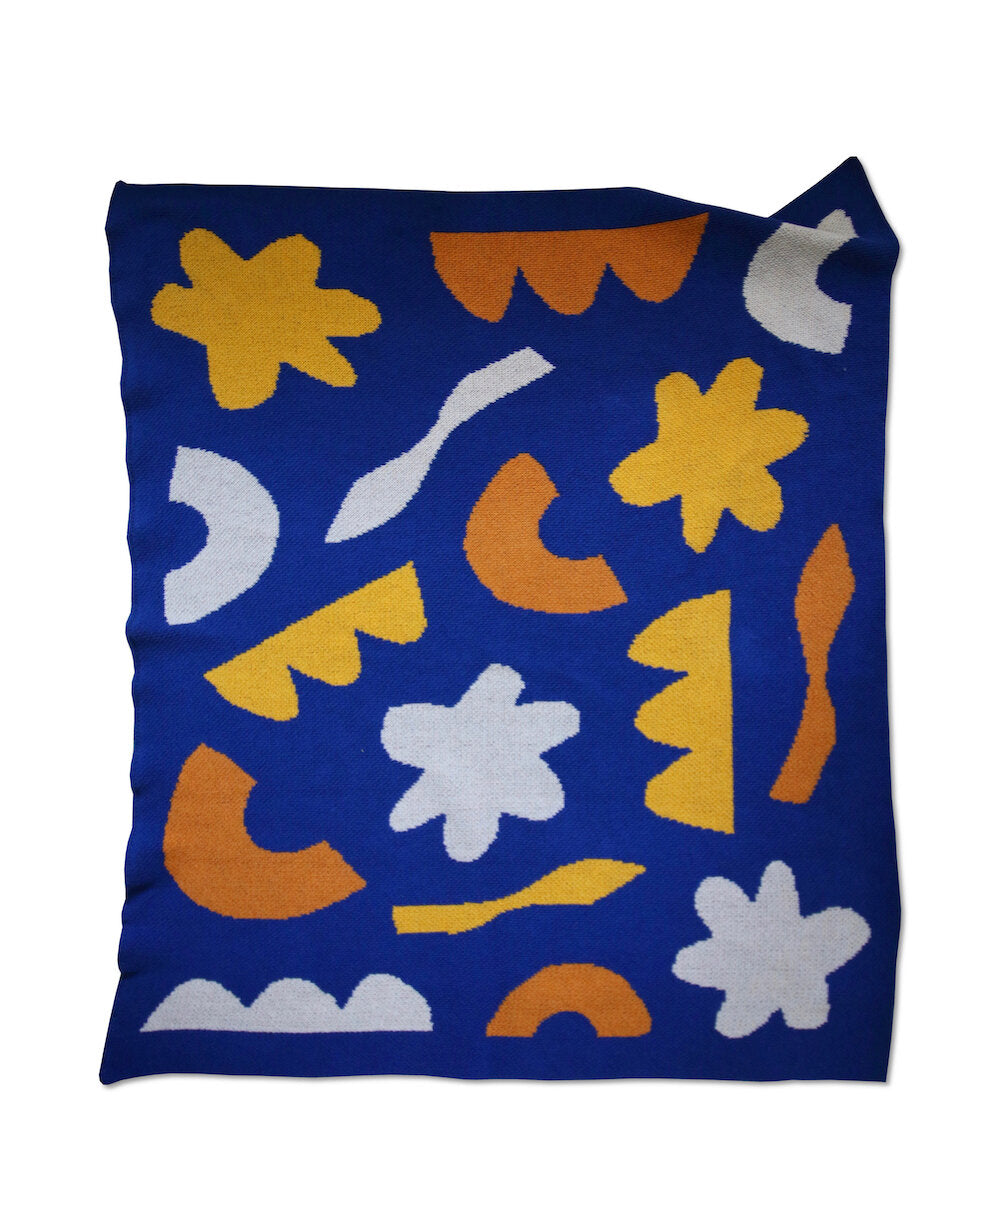 Royal Blue Shapes at Play Mini Throw Blanket Collaboration Design between Happy Habitat and Ampersand Design Studio